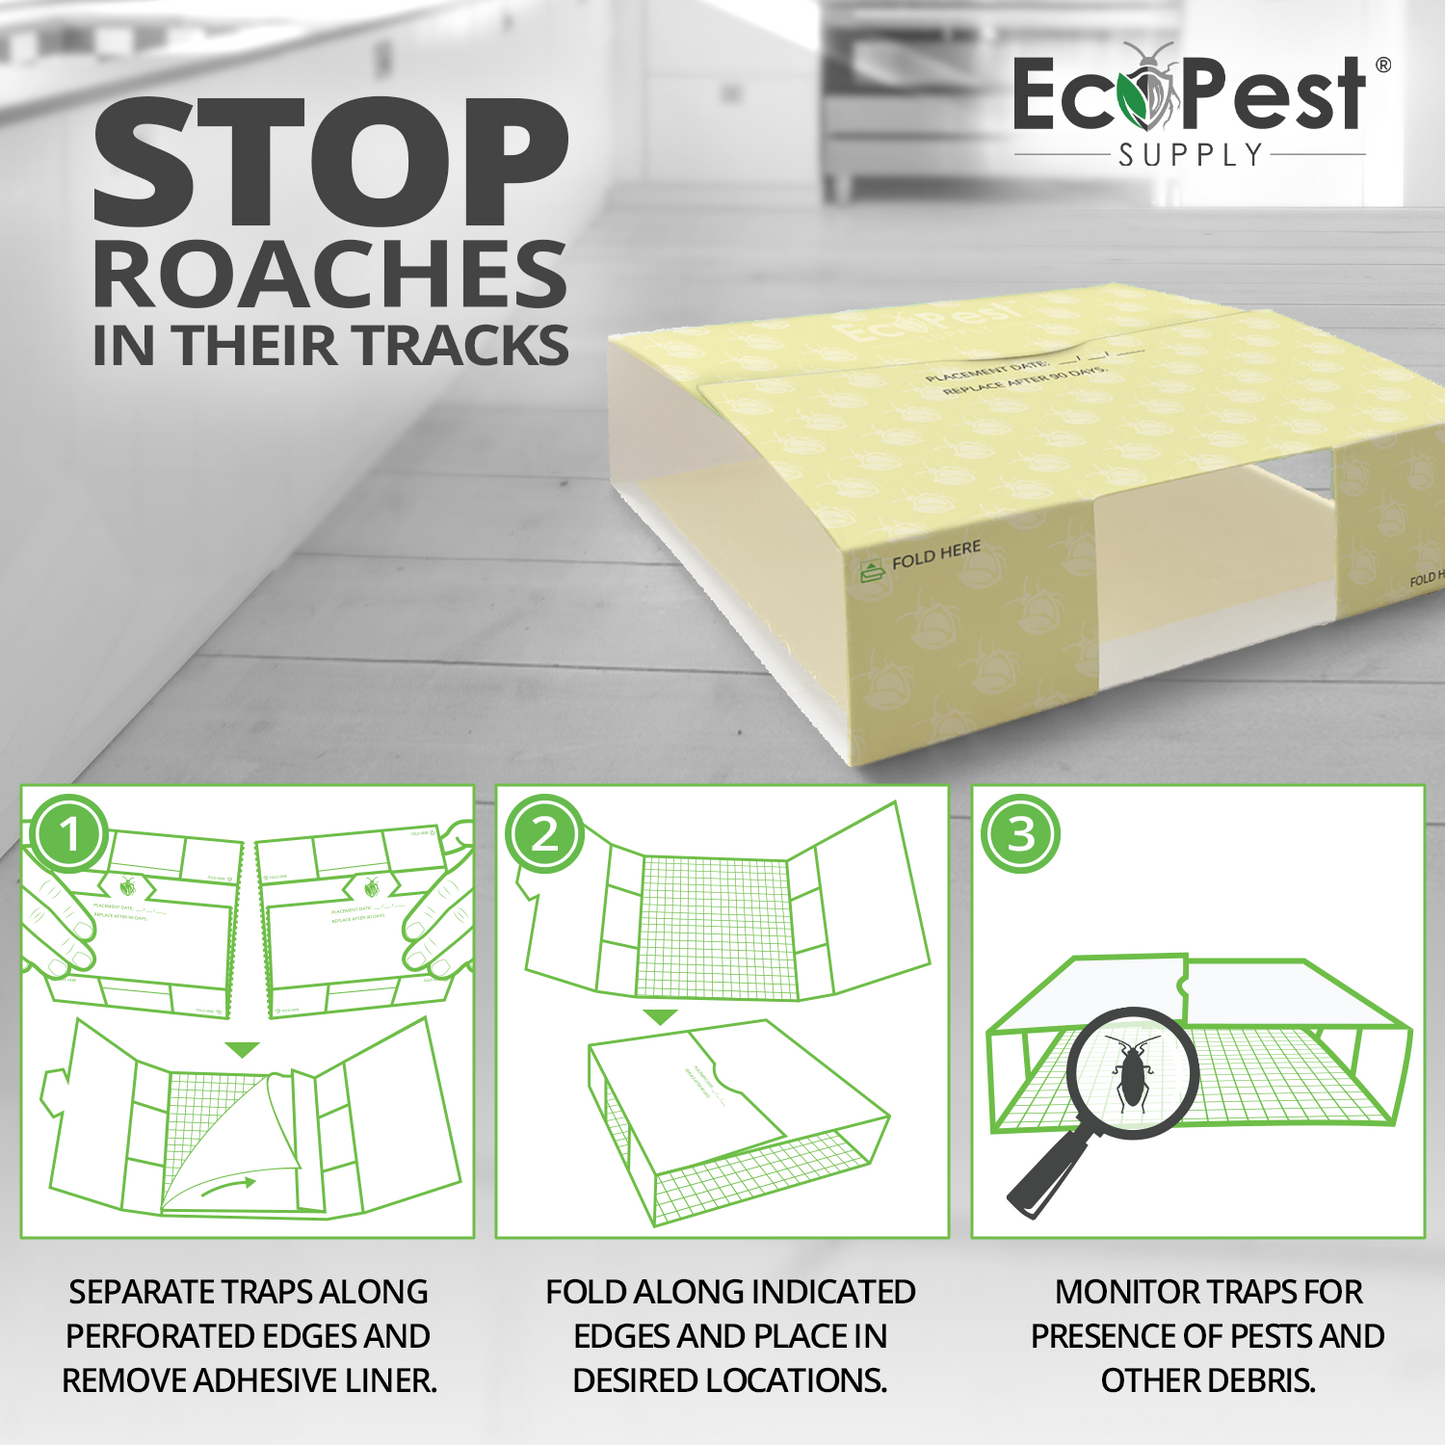 Roach Glue Traps – 20 Pack | Sticky Indoor Pest Control Trap for Cockroaches by EcoPest Supply